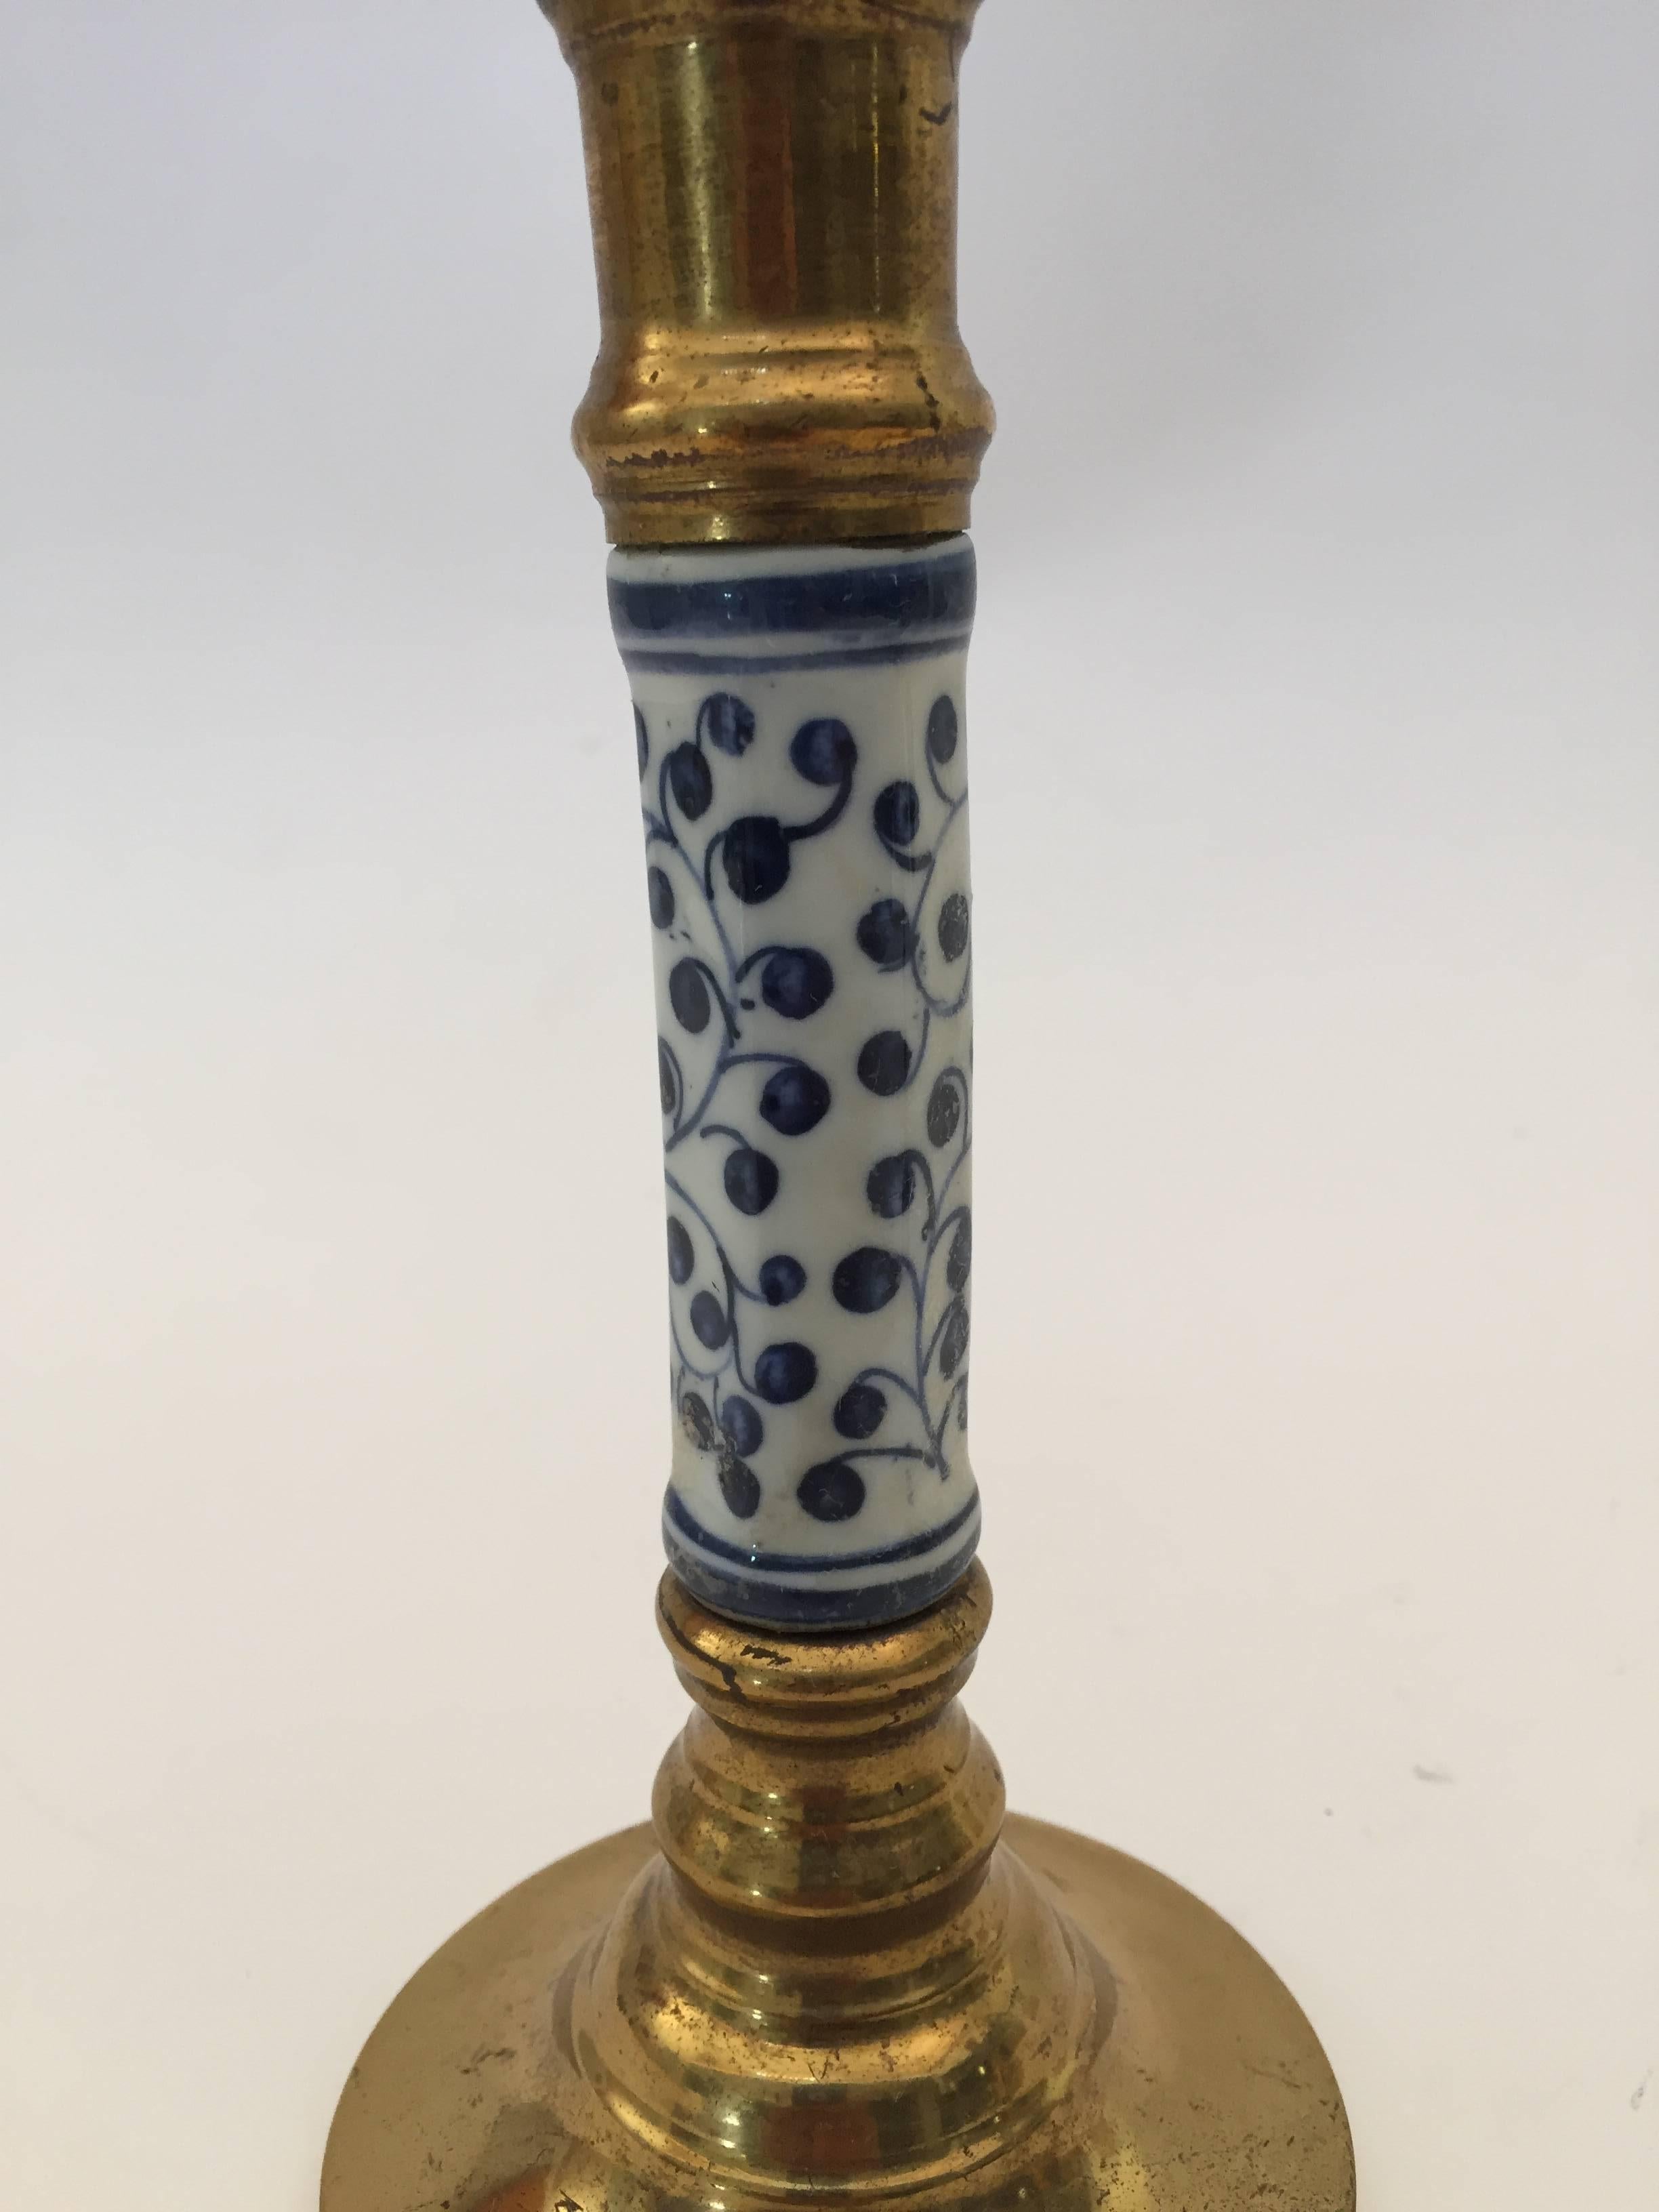 Polished Pair of Victorian Brass Candlesticks with Ceramic